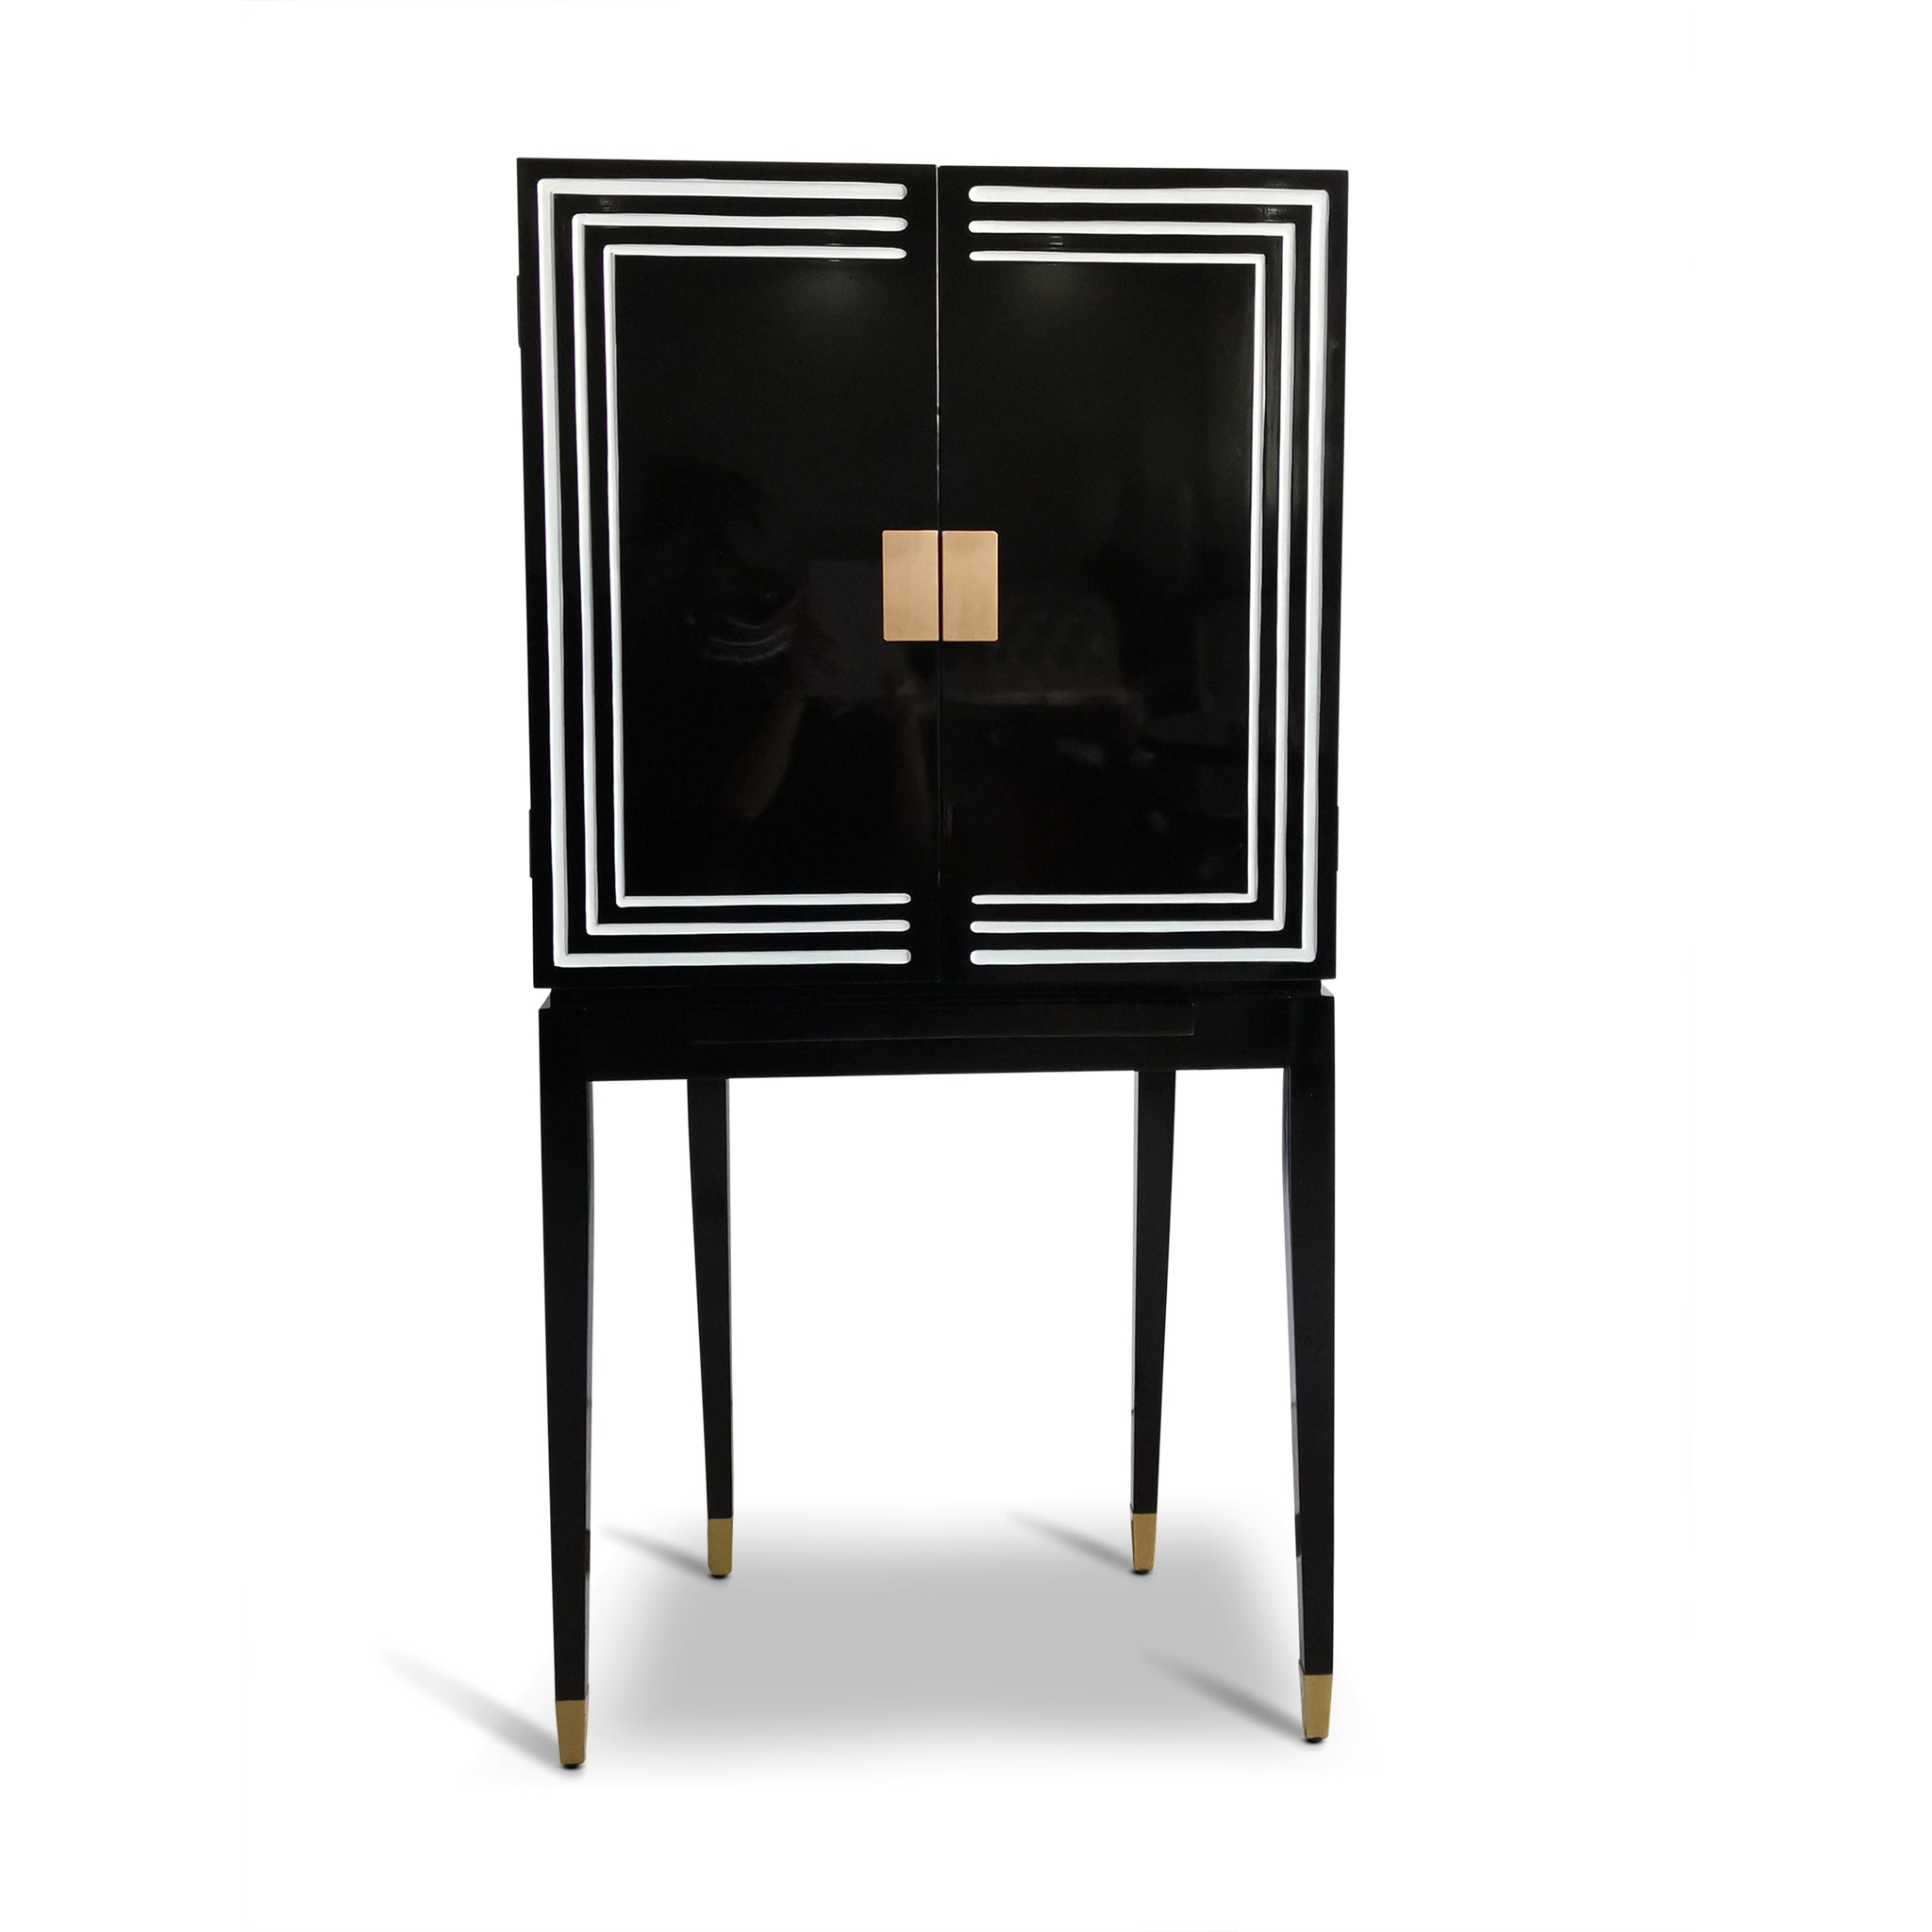 The Curator's Black Bar Cabinet